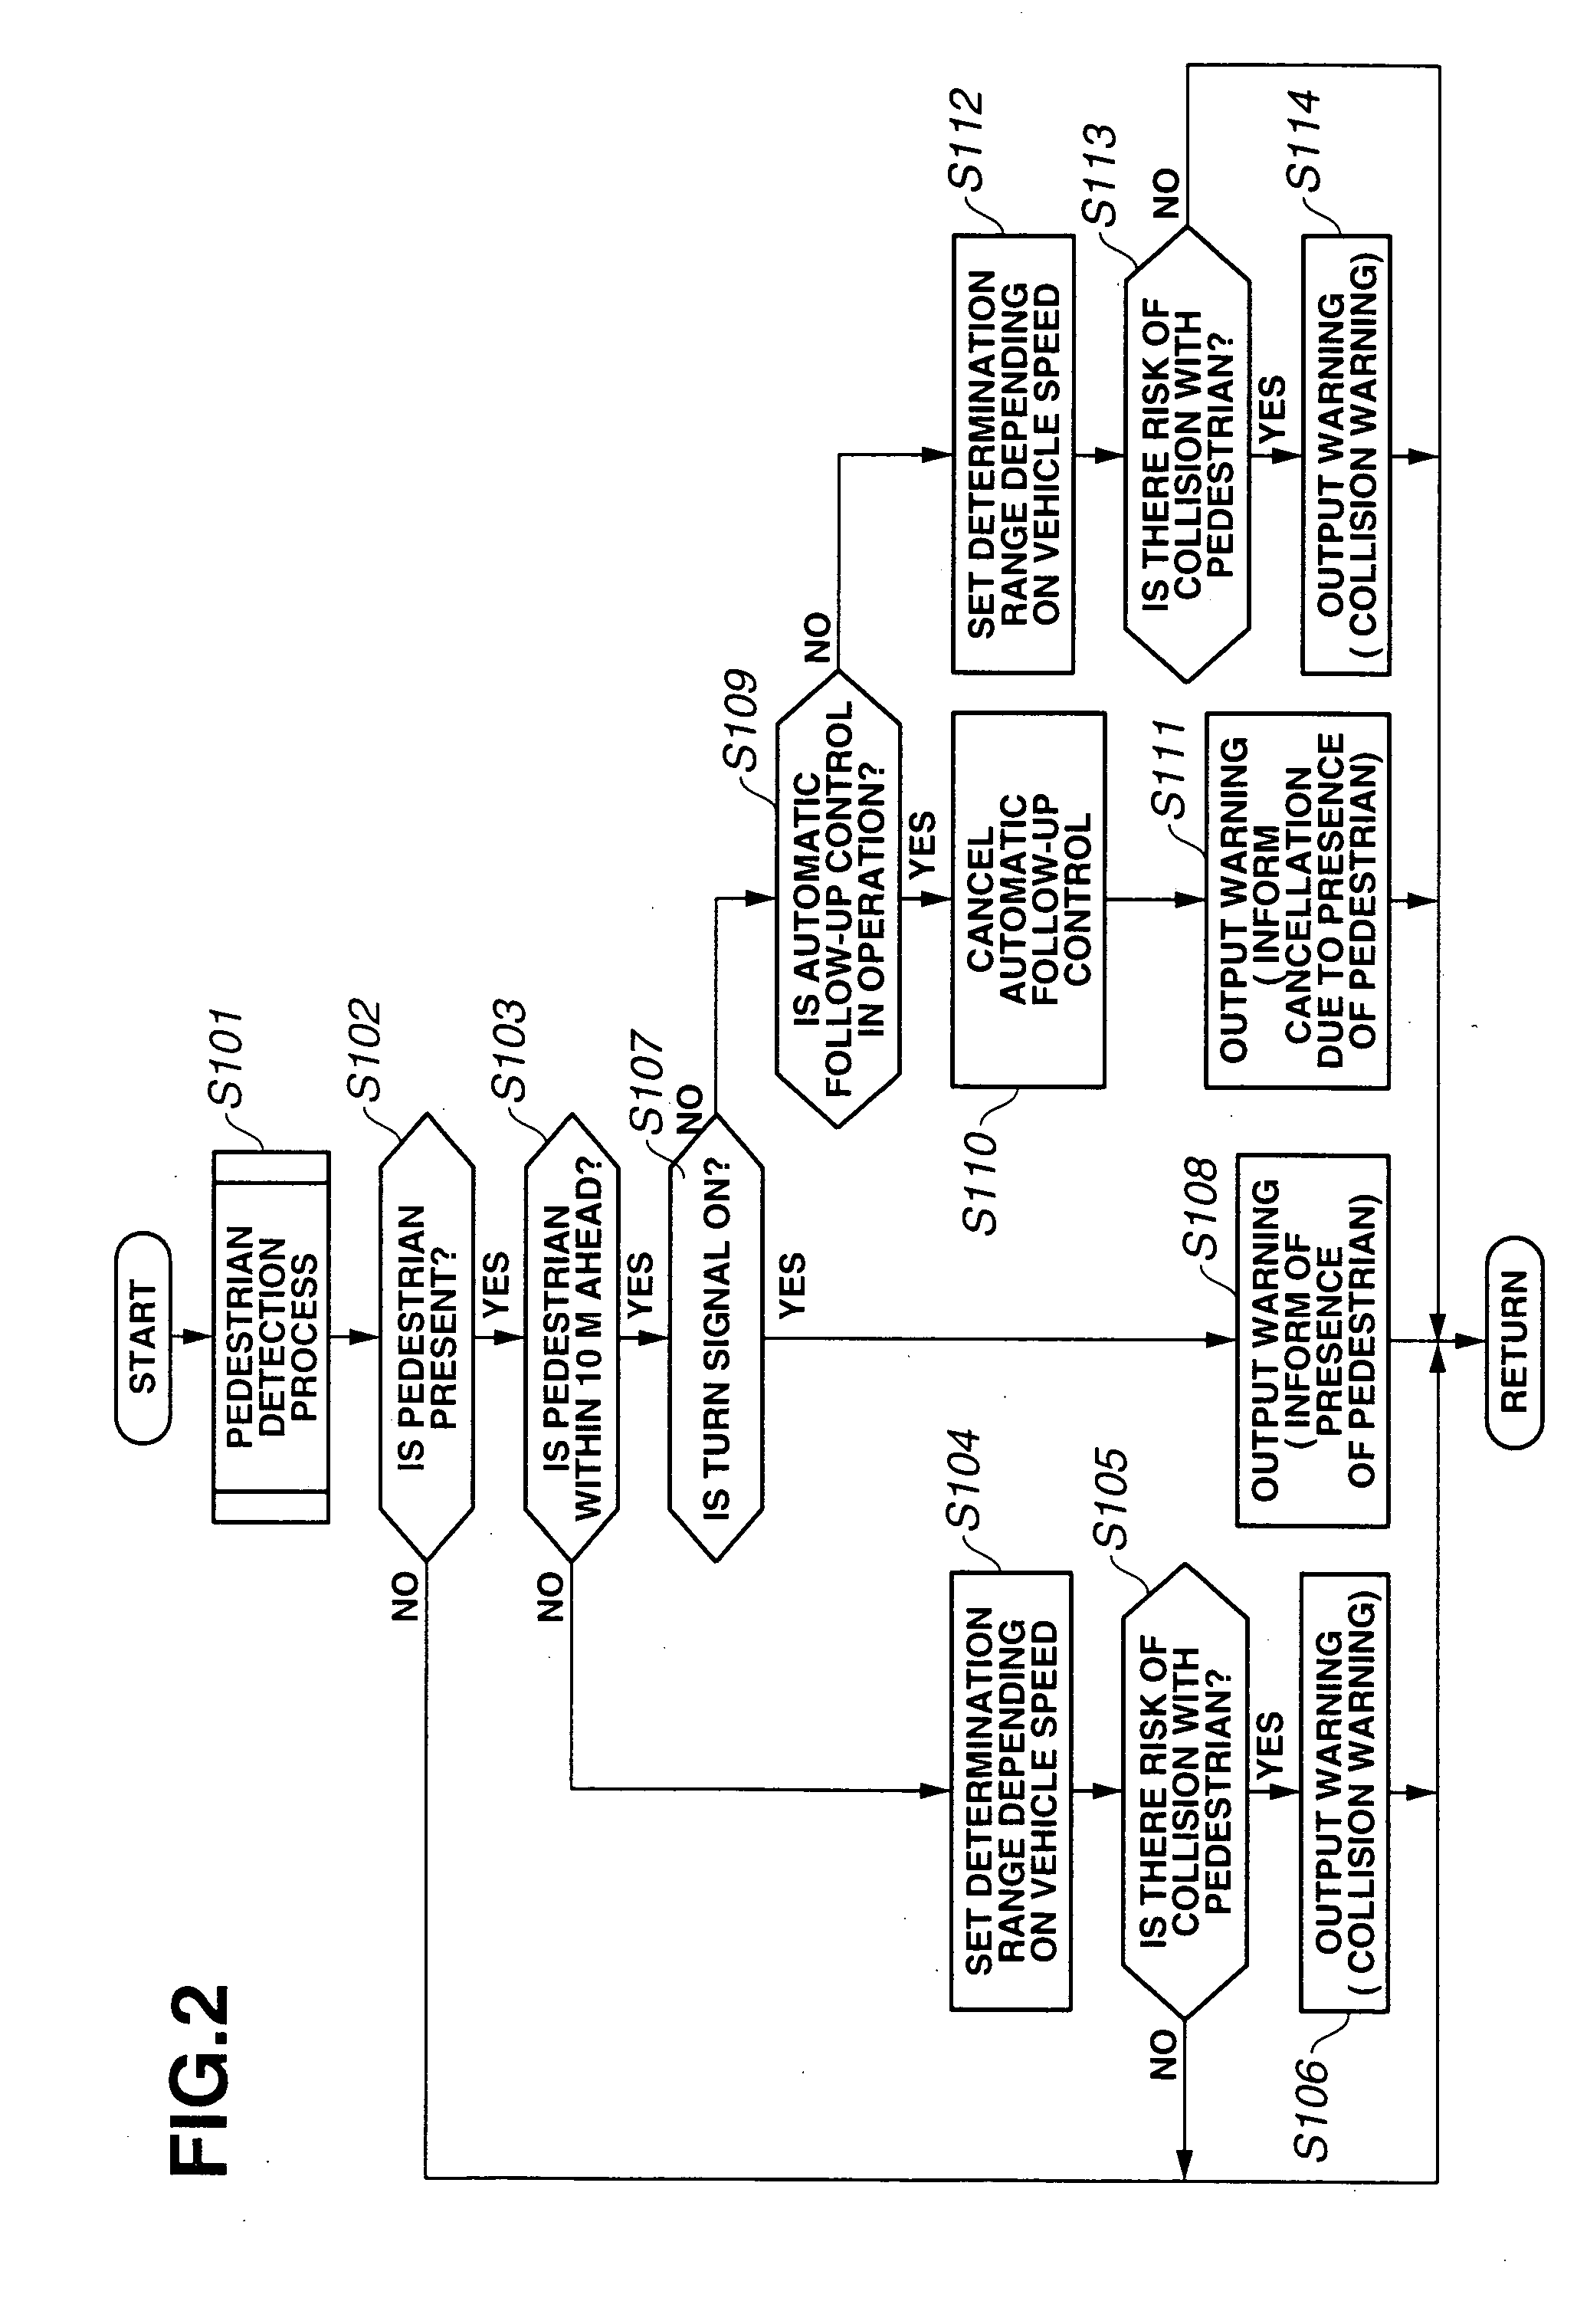 Pedestrian detection system and vehicle driving assist system with a pedestrian detection system